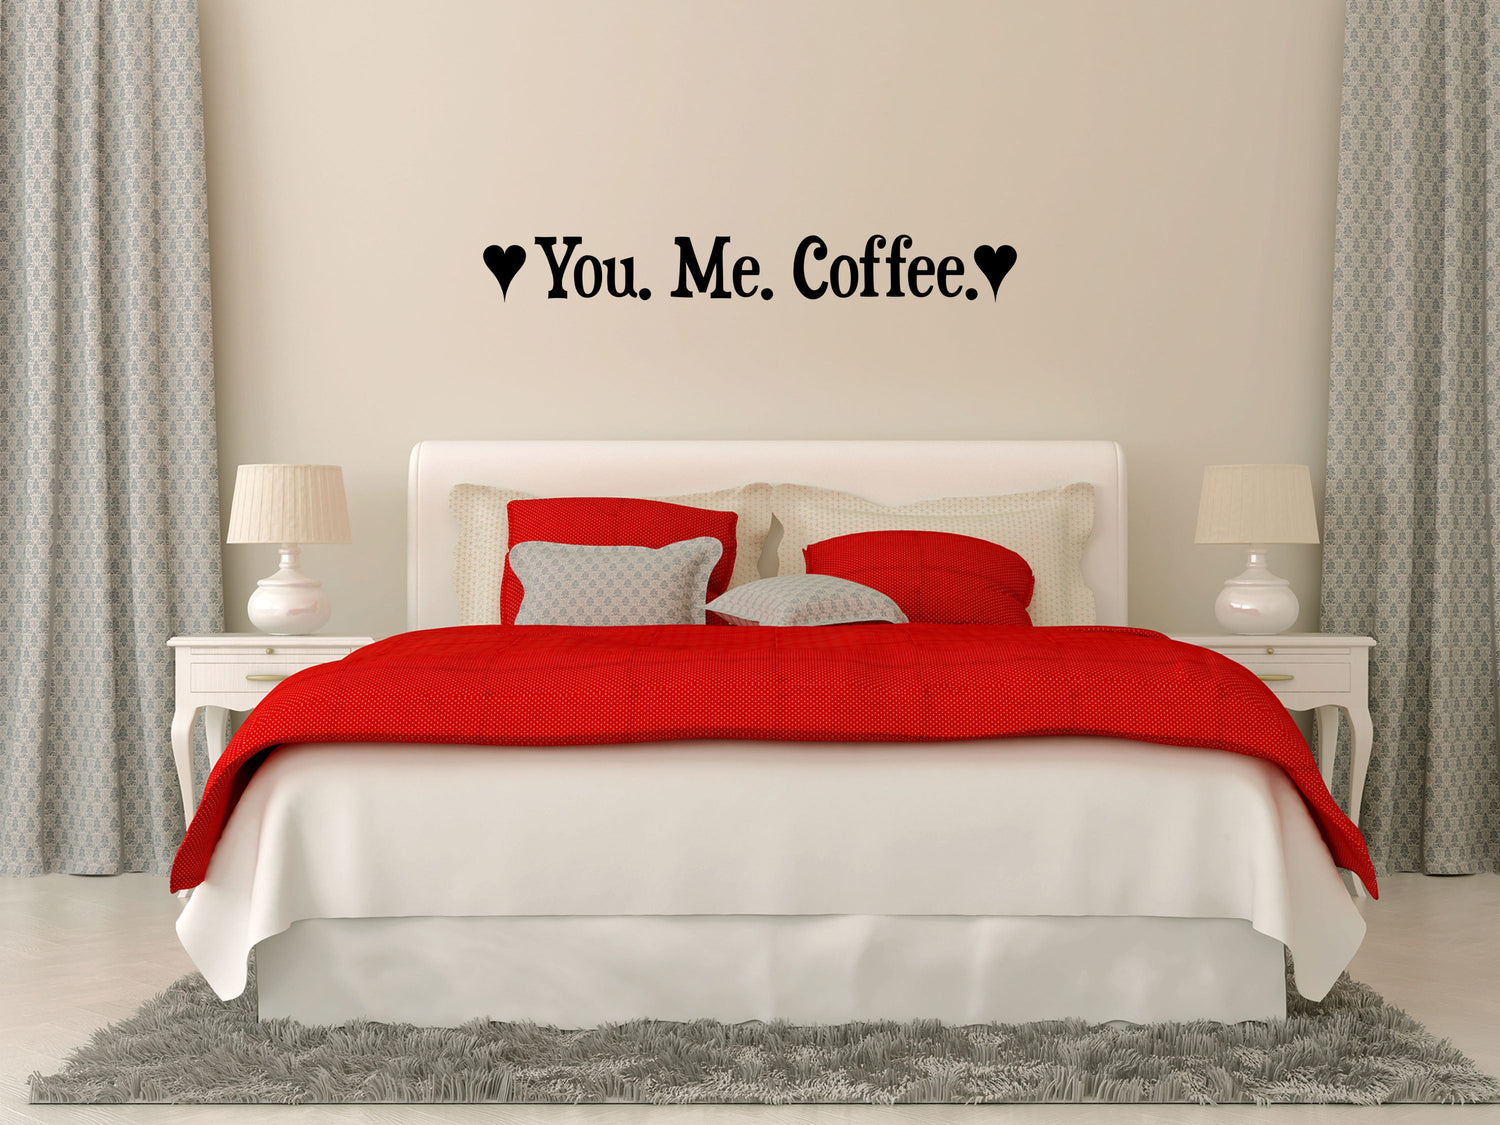 You Me Coffee Vinyl Quote Sticker- Inspirational Wall Decals Home Decor Decals Inspirational Wall Signs 